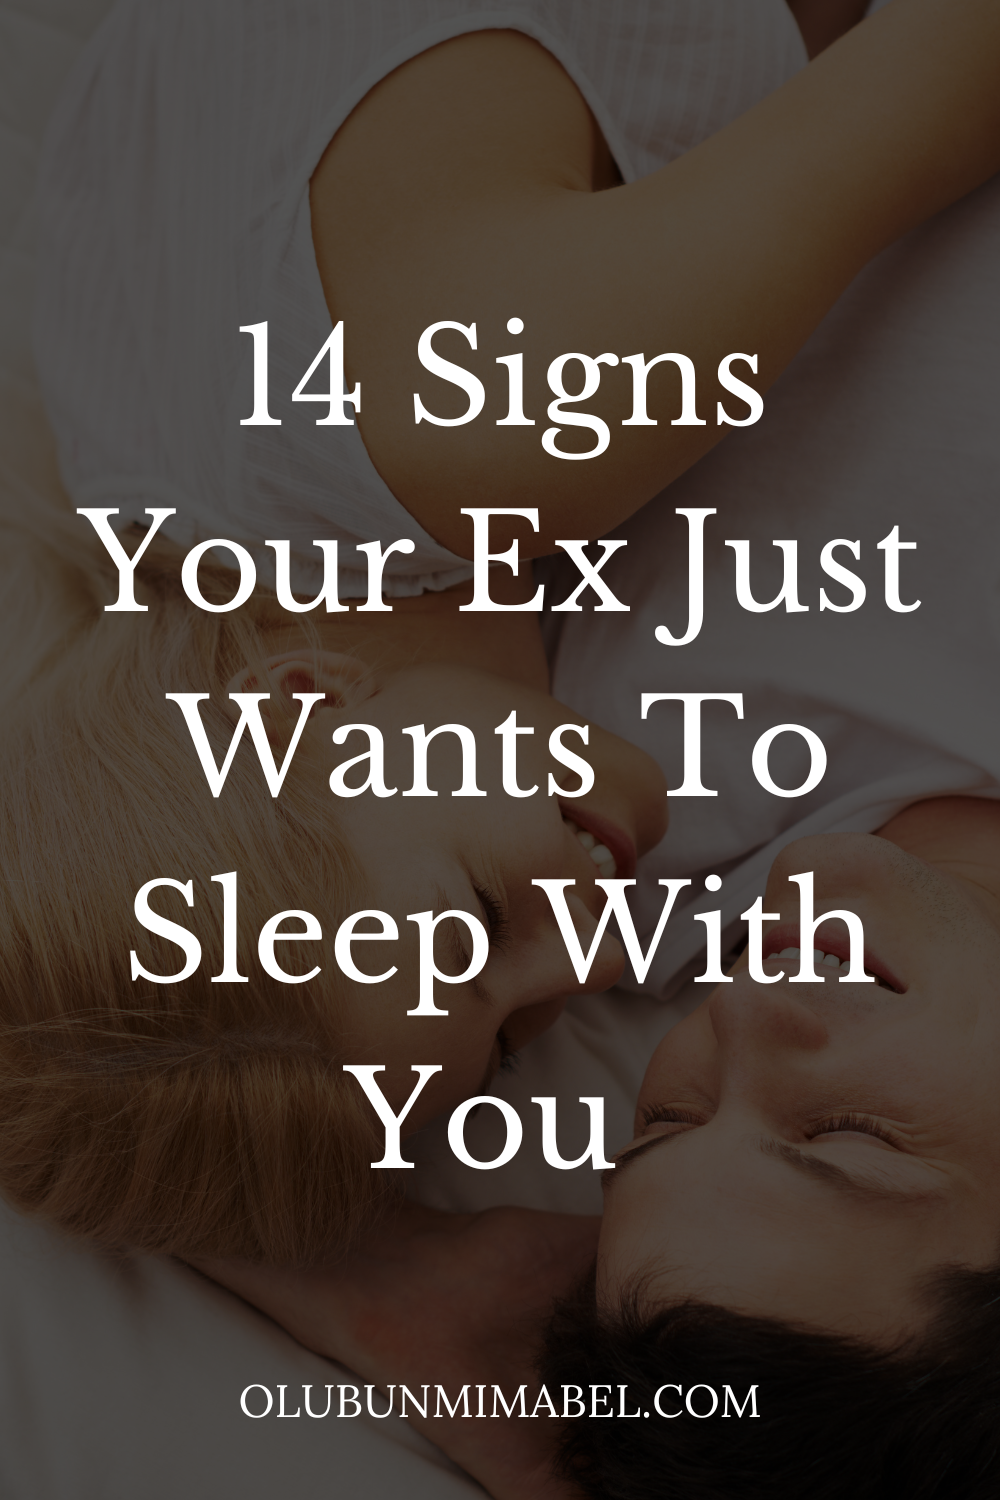  Signs Your Ex Just Wants To Sleep With You